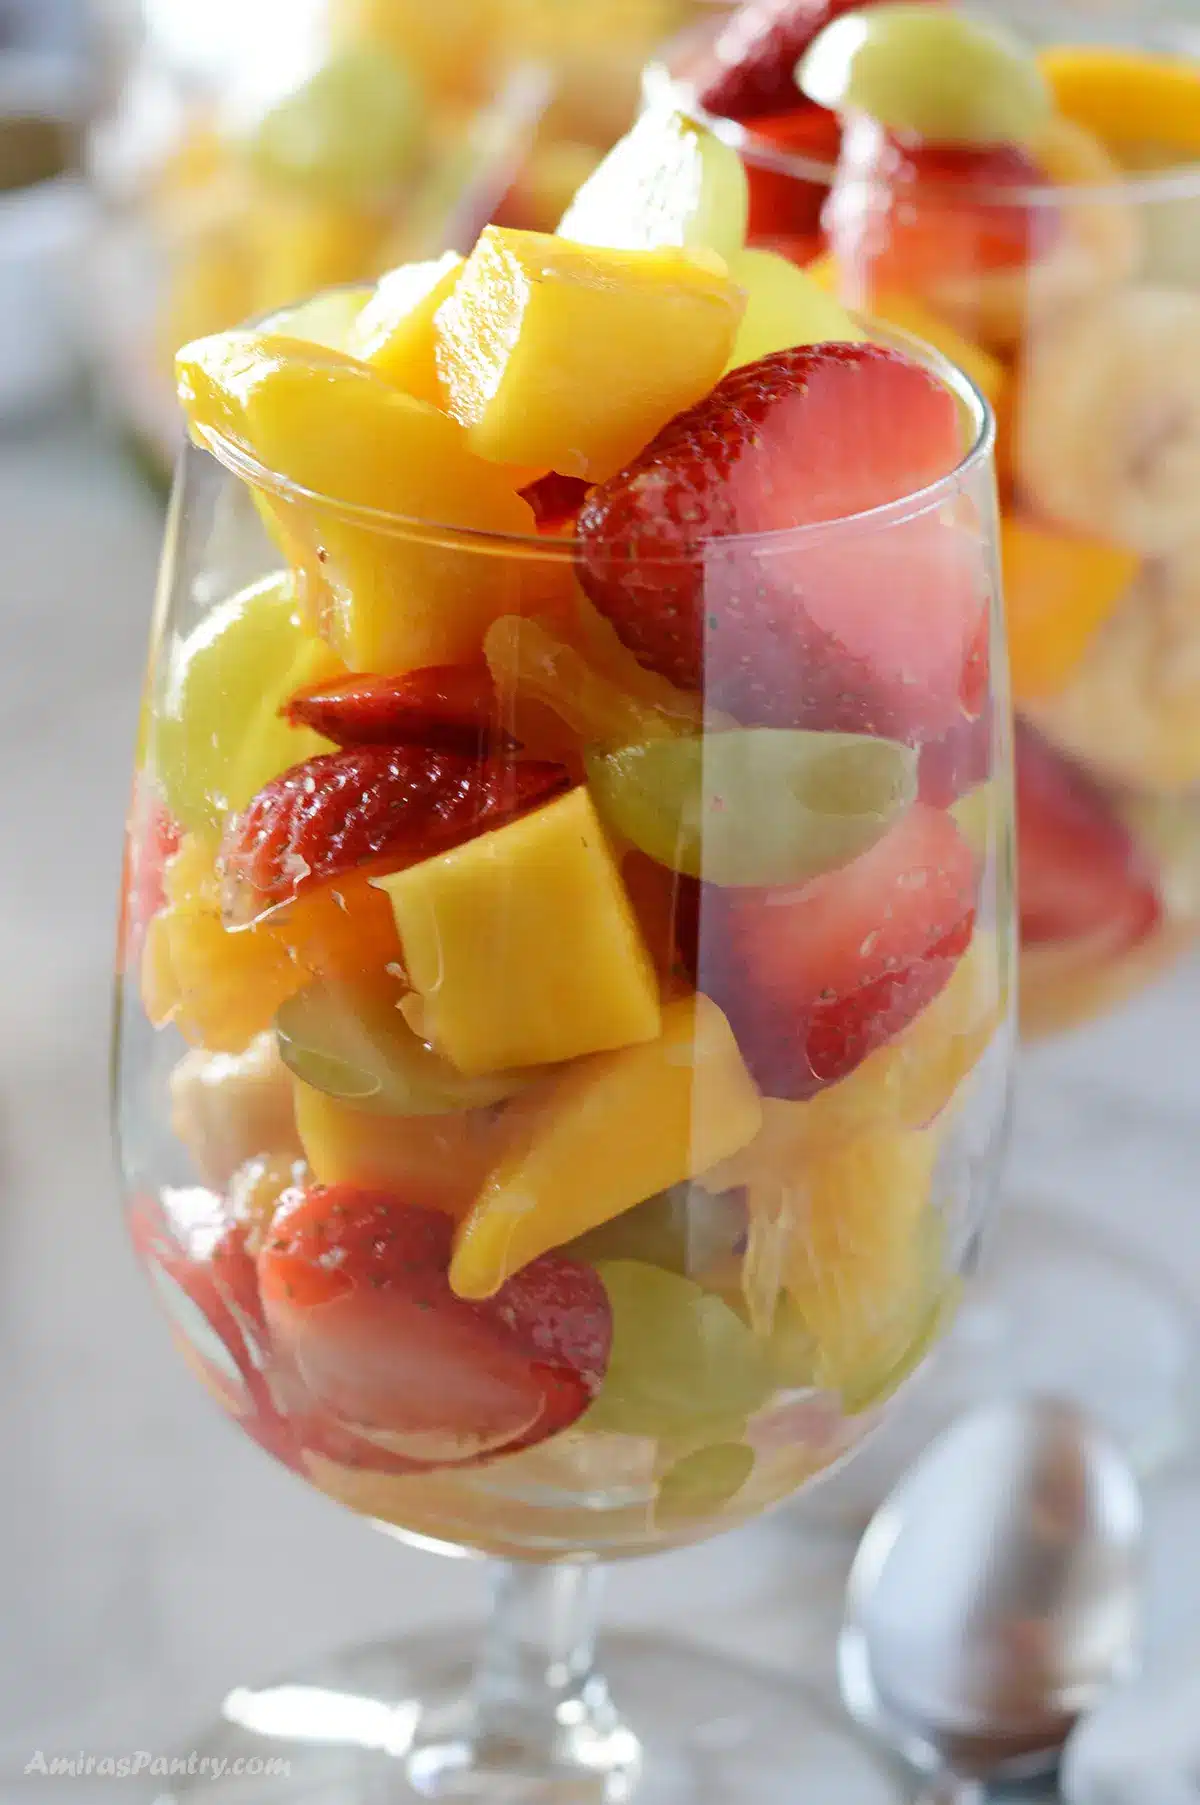 Fruit salad served in glass cups.